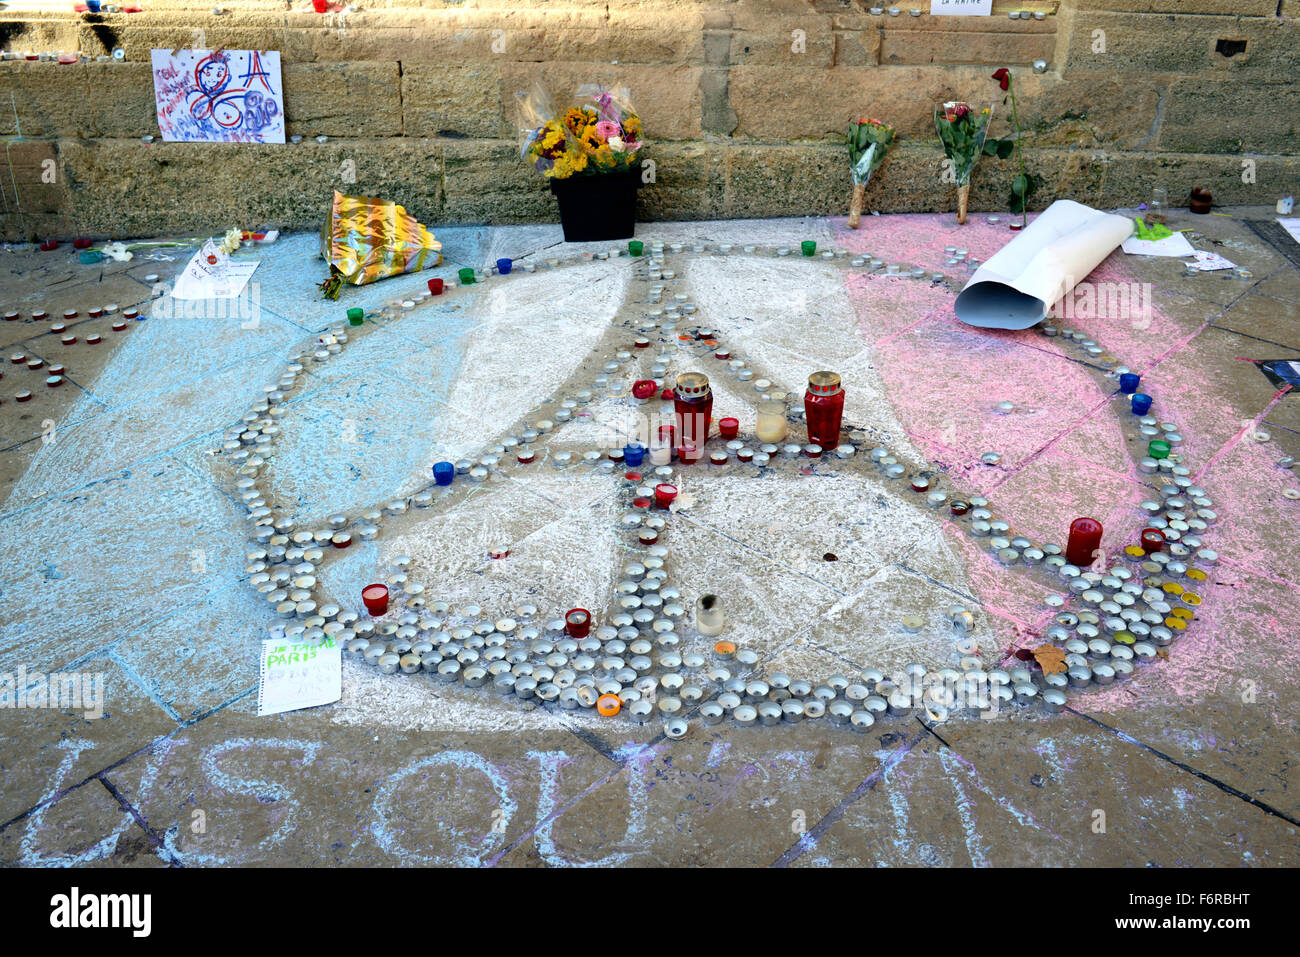 Aix-en-Provence, France. 19th November, 2015. Pray for Paris. Memorial outside the Town Hall in Aix-en-Provence, France for the victims of the Paris attacks in the form of the Eiffel Tower, the French flag and the peace symbol. Credit:  Chris Hellier/Alamy Live News Stock Photo